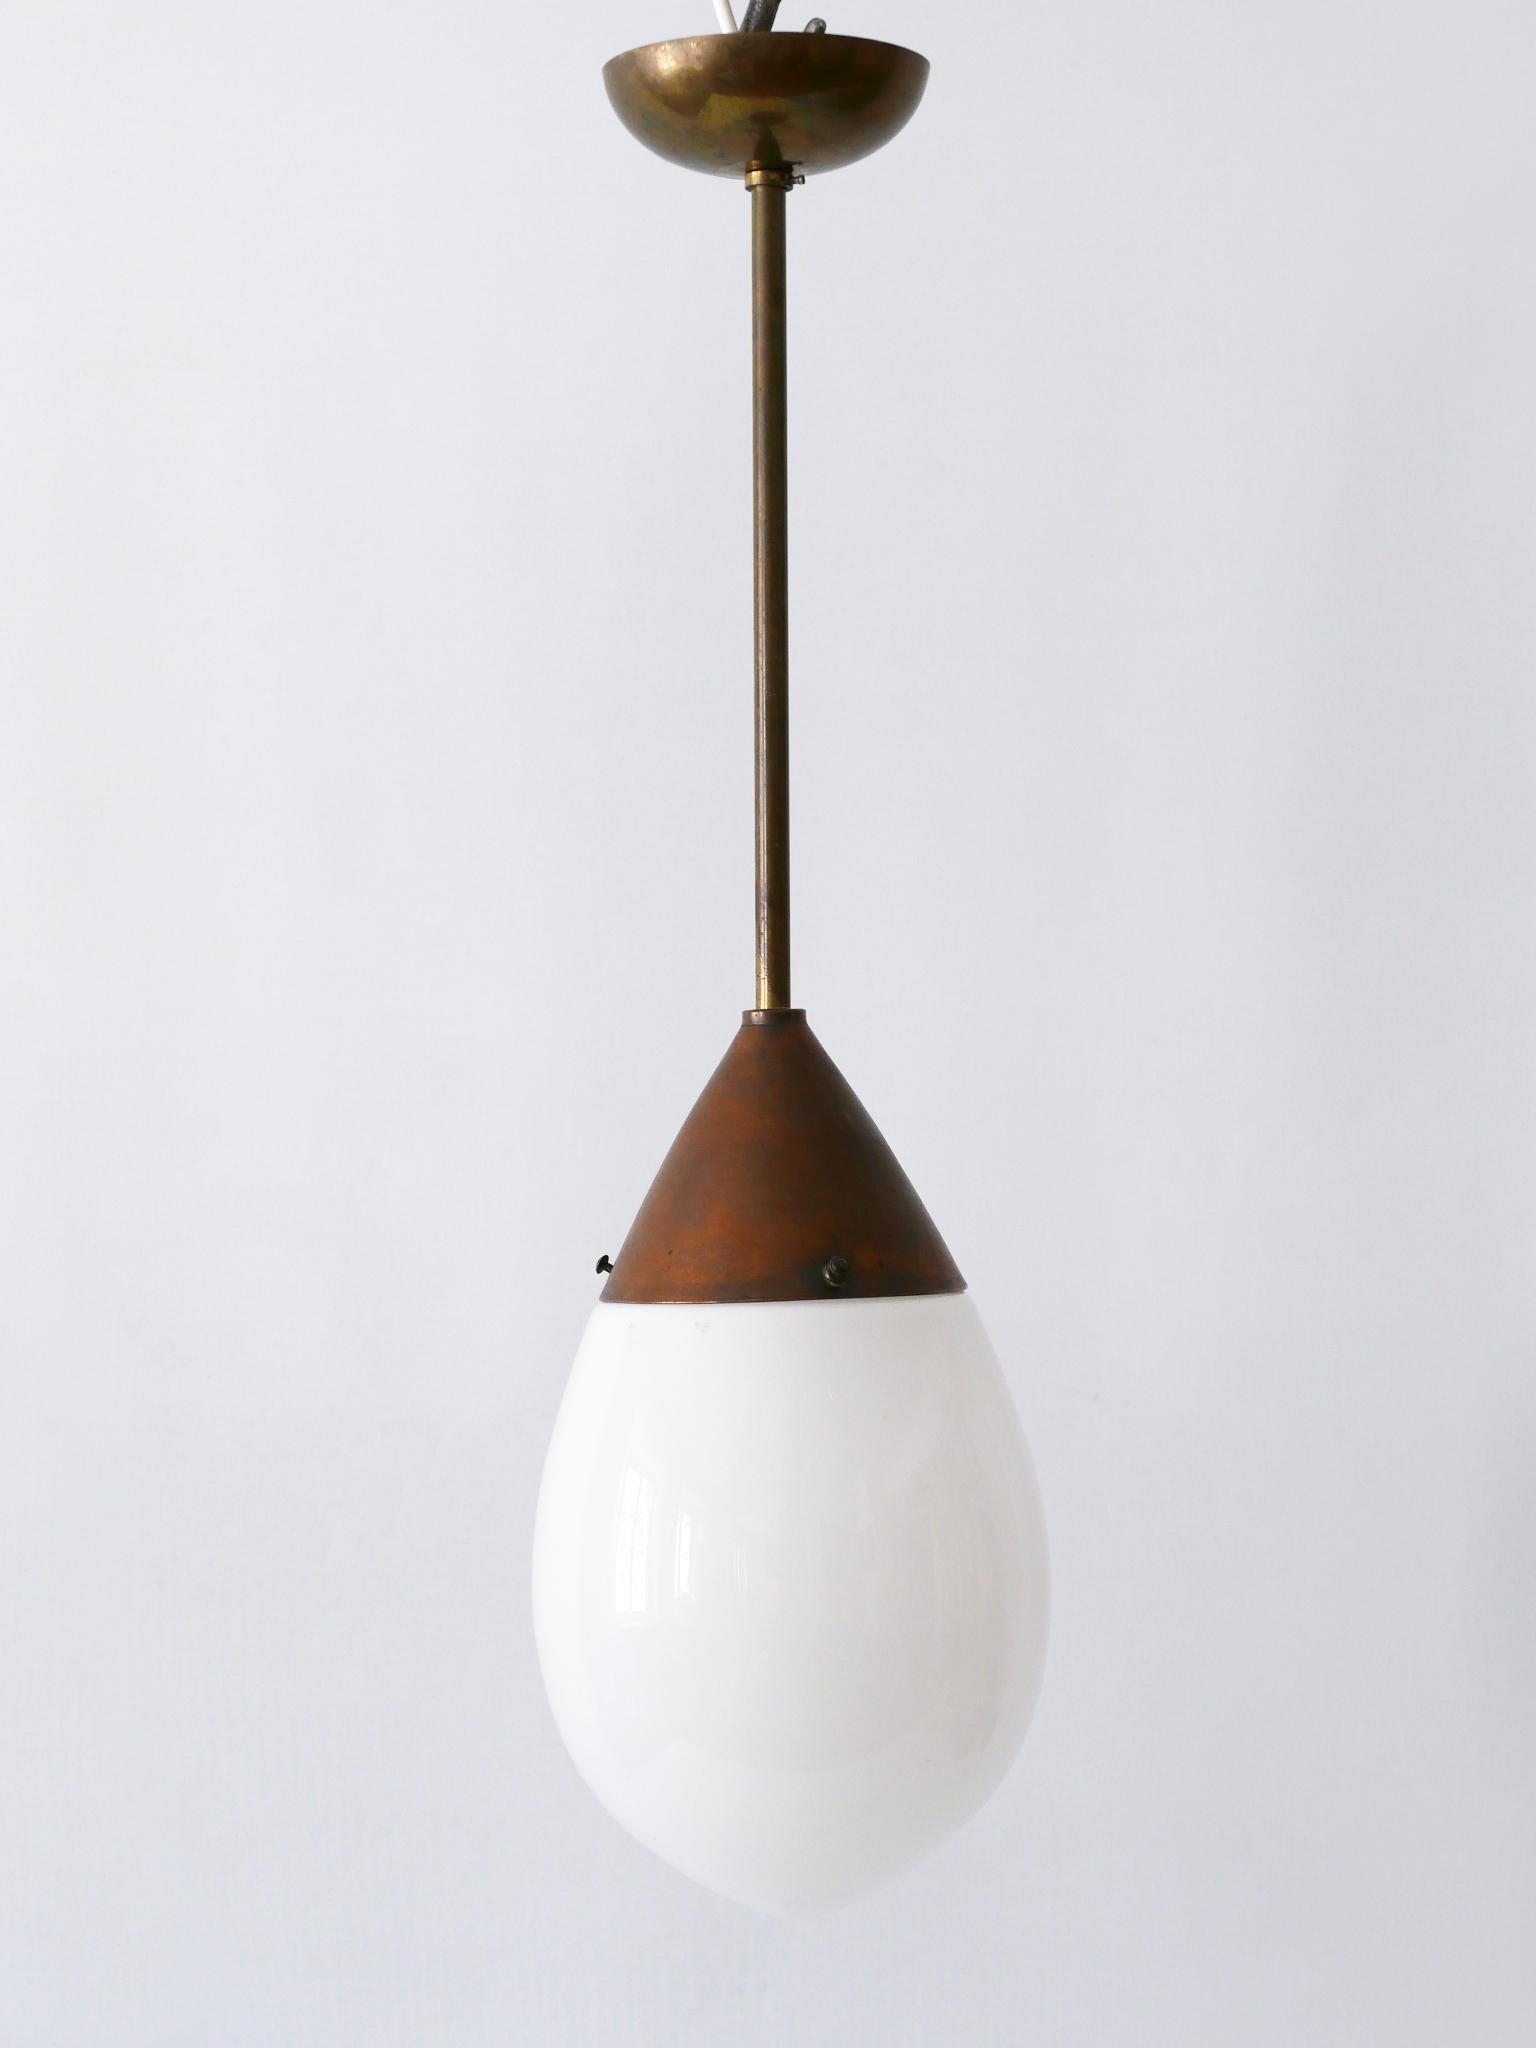 Exceptional Bauhaus Pendant Lamp or Hanging Light Drop by Siemens 1920s, Germany For Sale 8